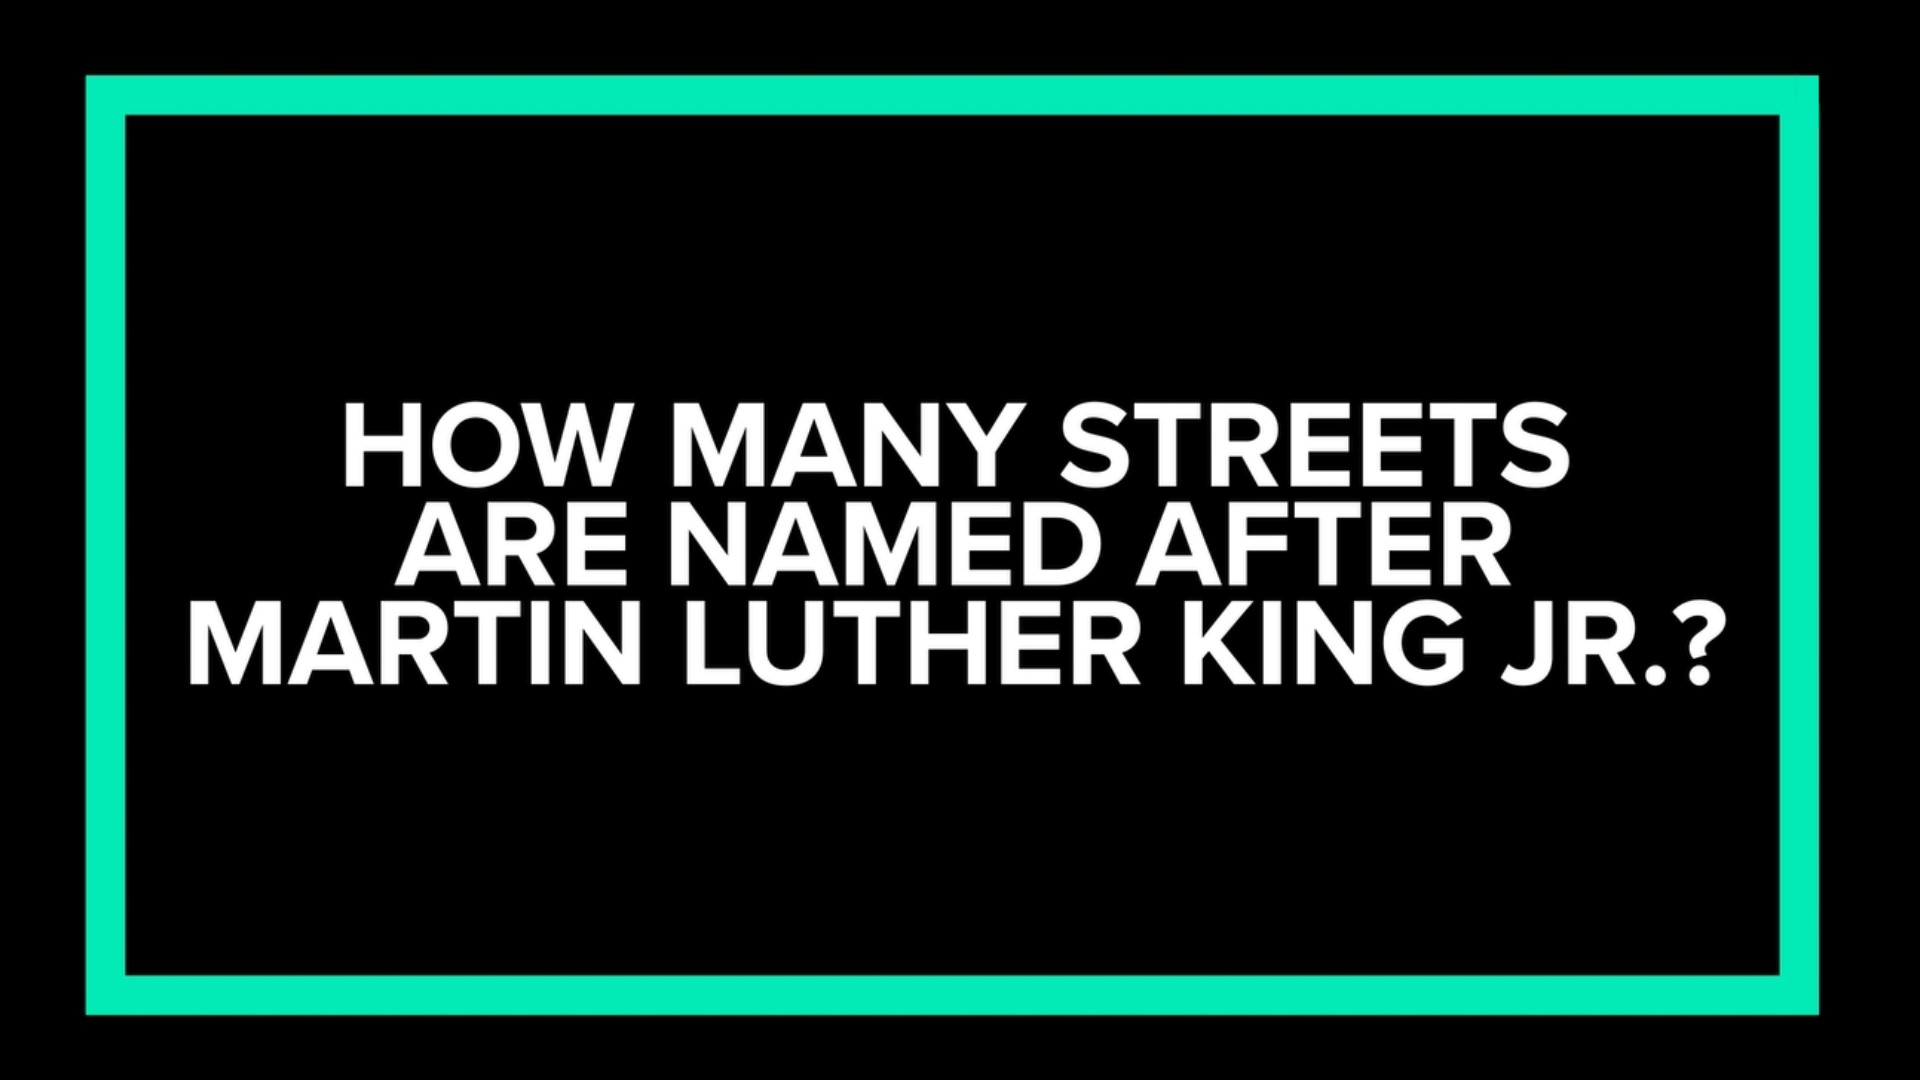 You’ve probably driven on a road named after the late Martin Luther King Jr. But, the number of roads named after him extends far past American streets.